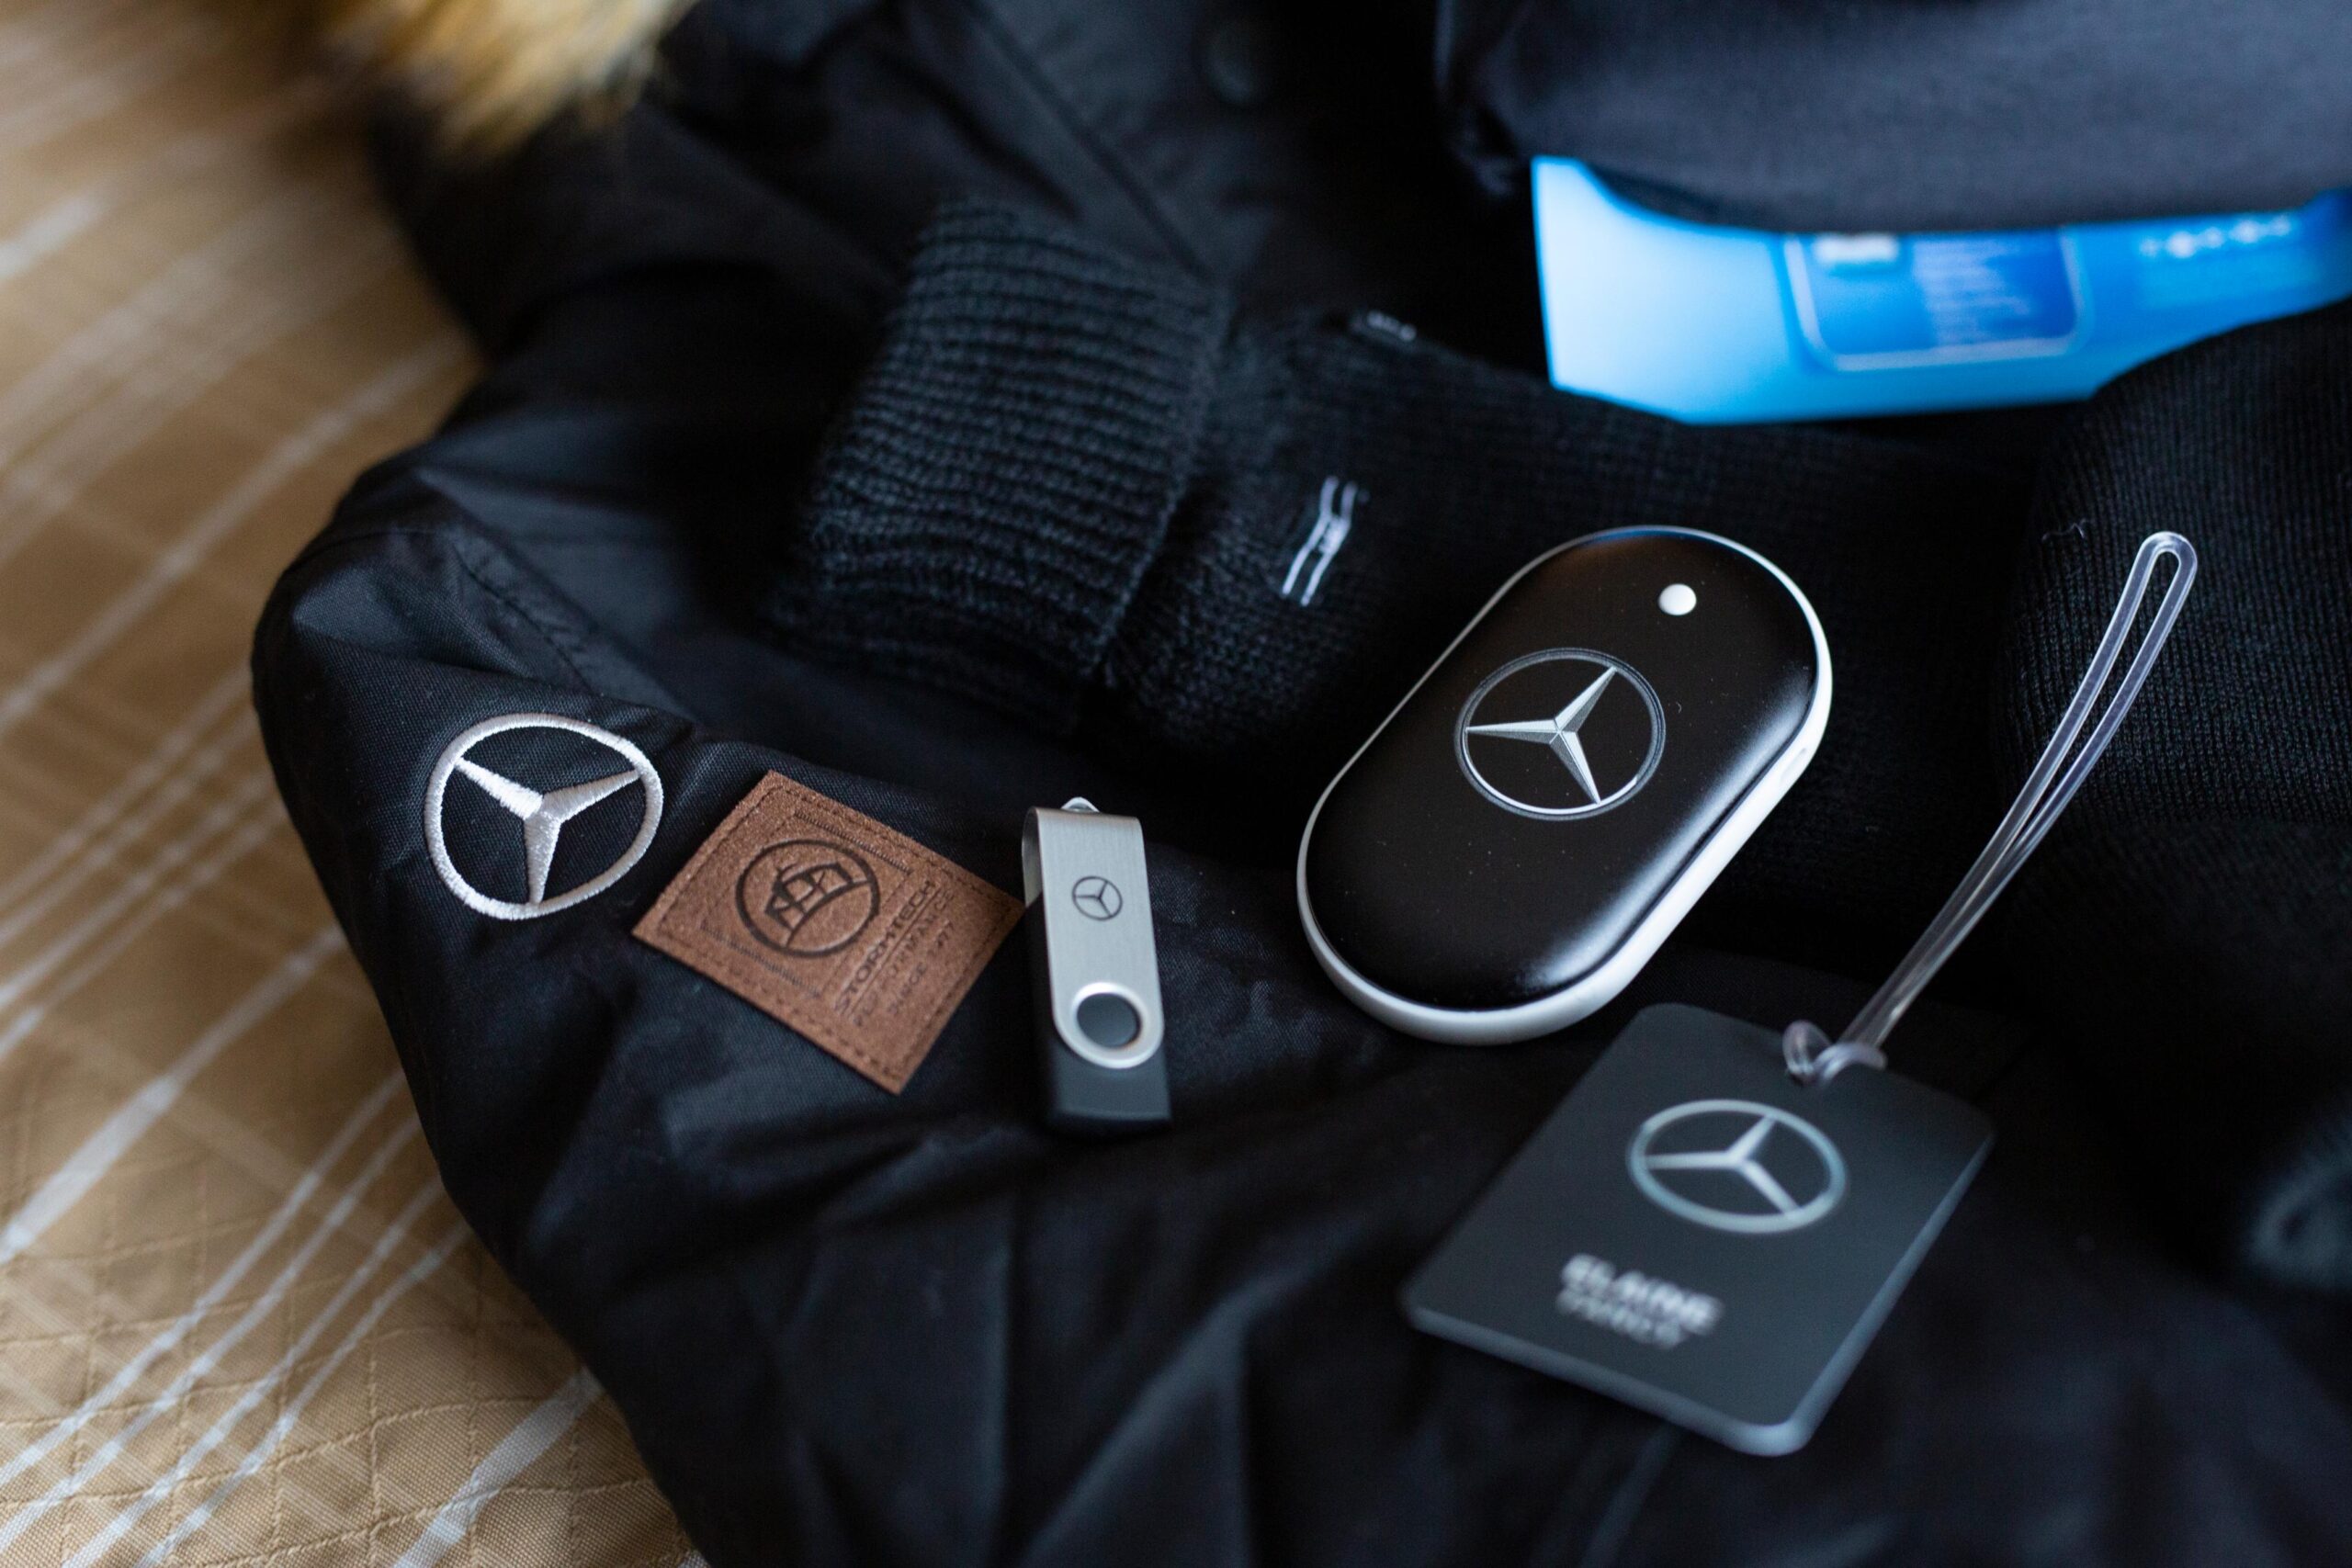 Mercedes Benz luggage tag, USB stick, hat, and a black jacket